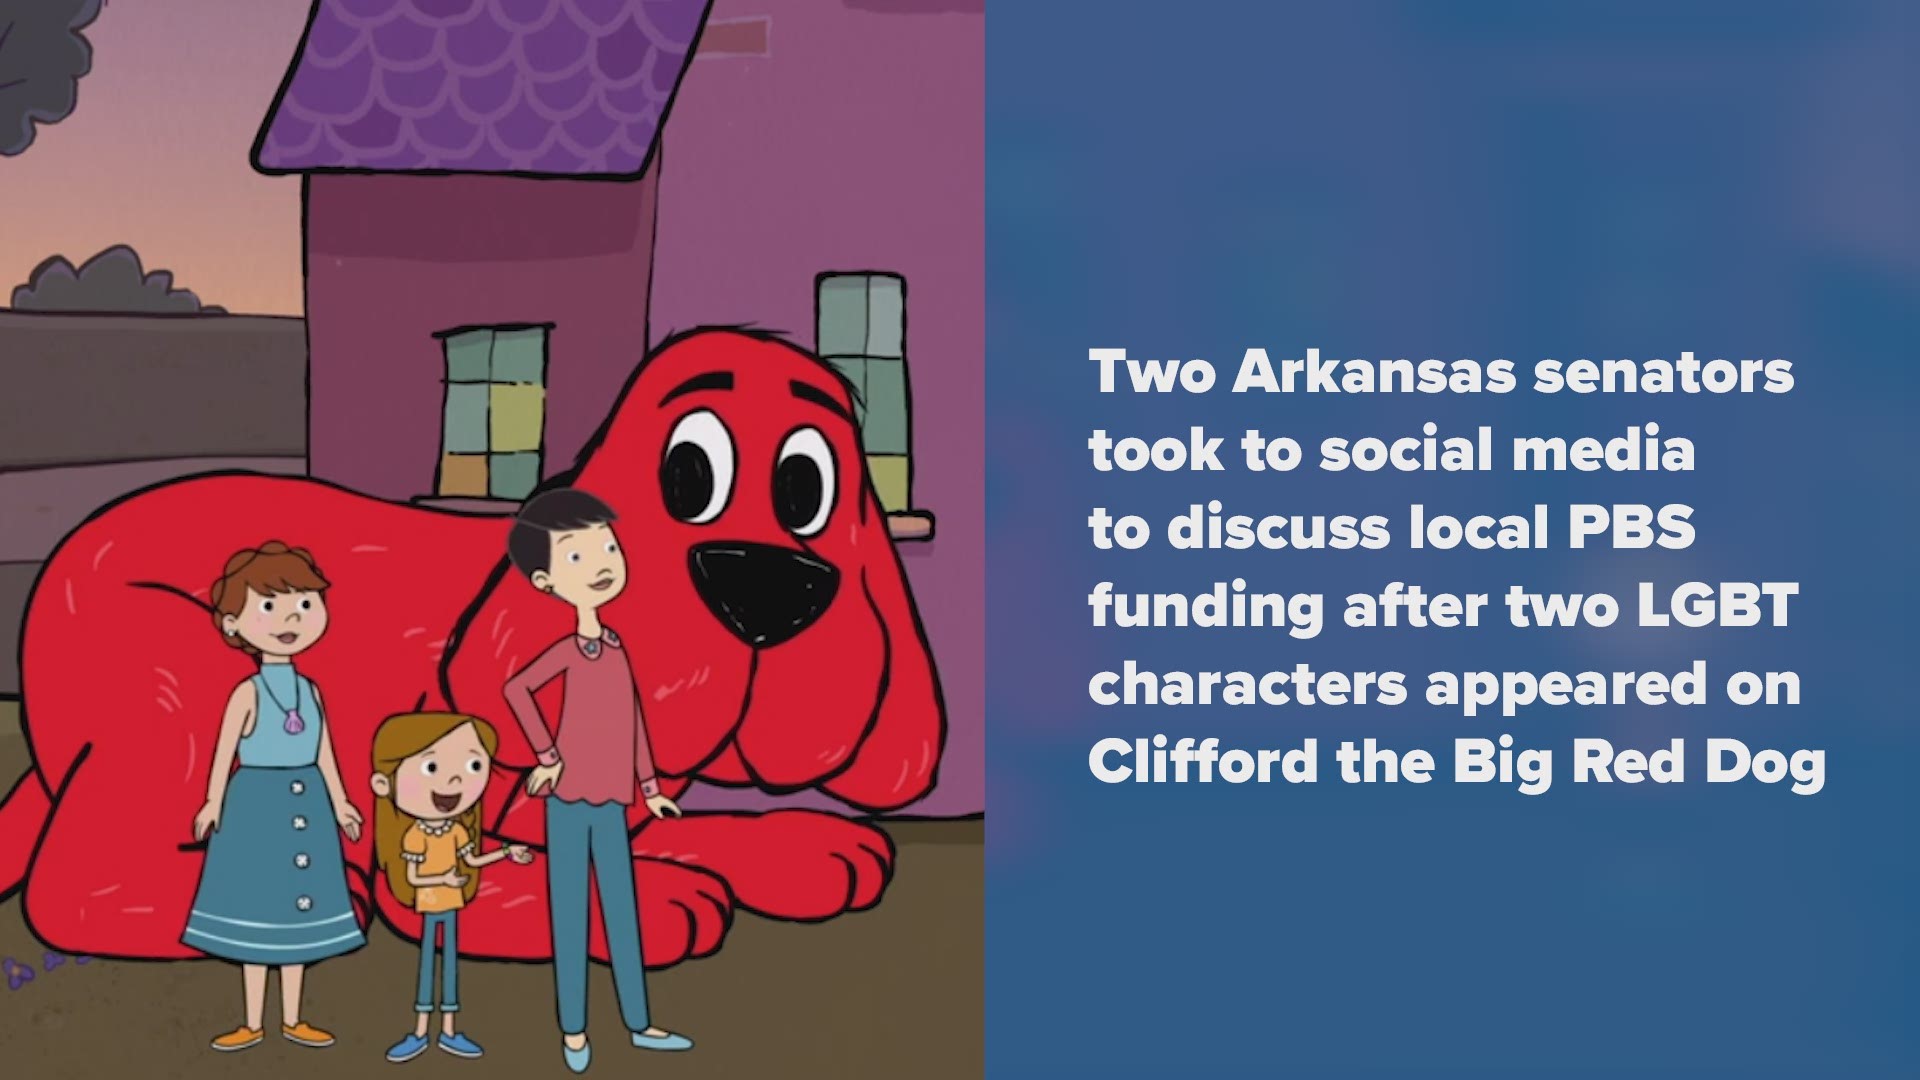 State senators Jason Rapert and Bob Ballinger took to social media to discuss PBS funding after two LGBT characters appeared on Clifford the Big Red Dog.